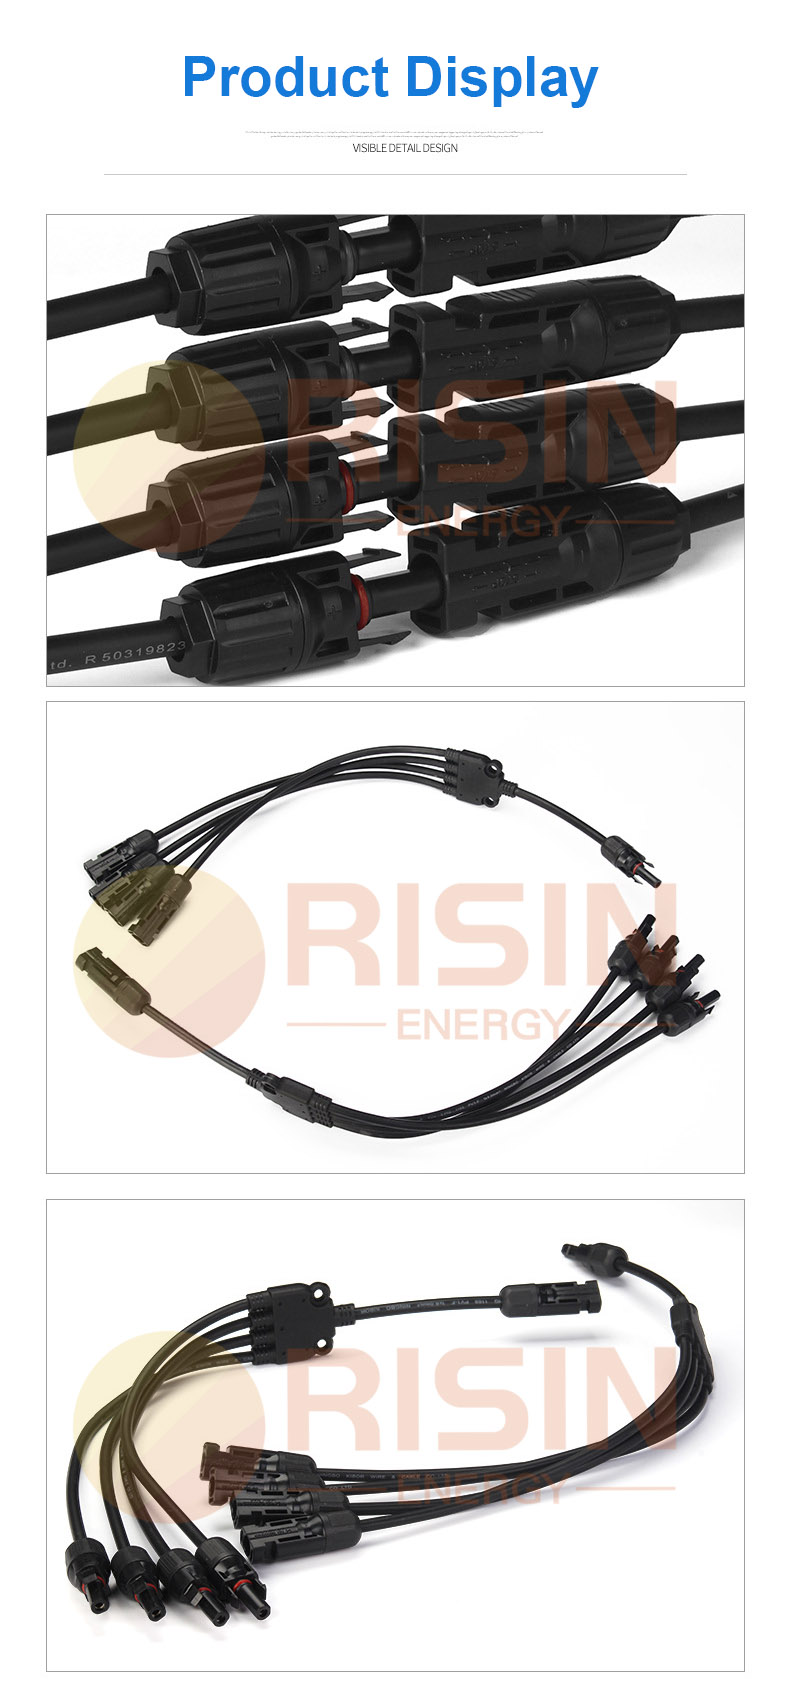 Cable ramal fotovoltaico 4to1